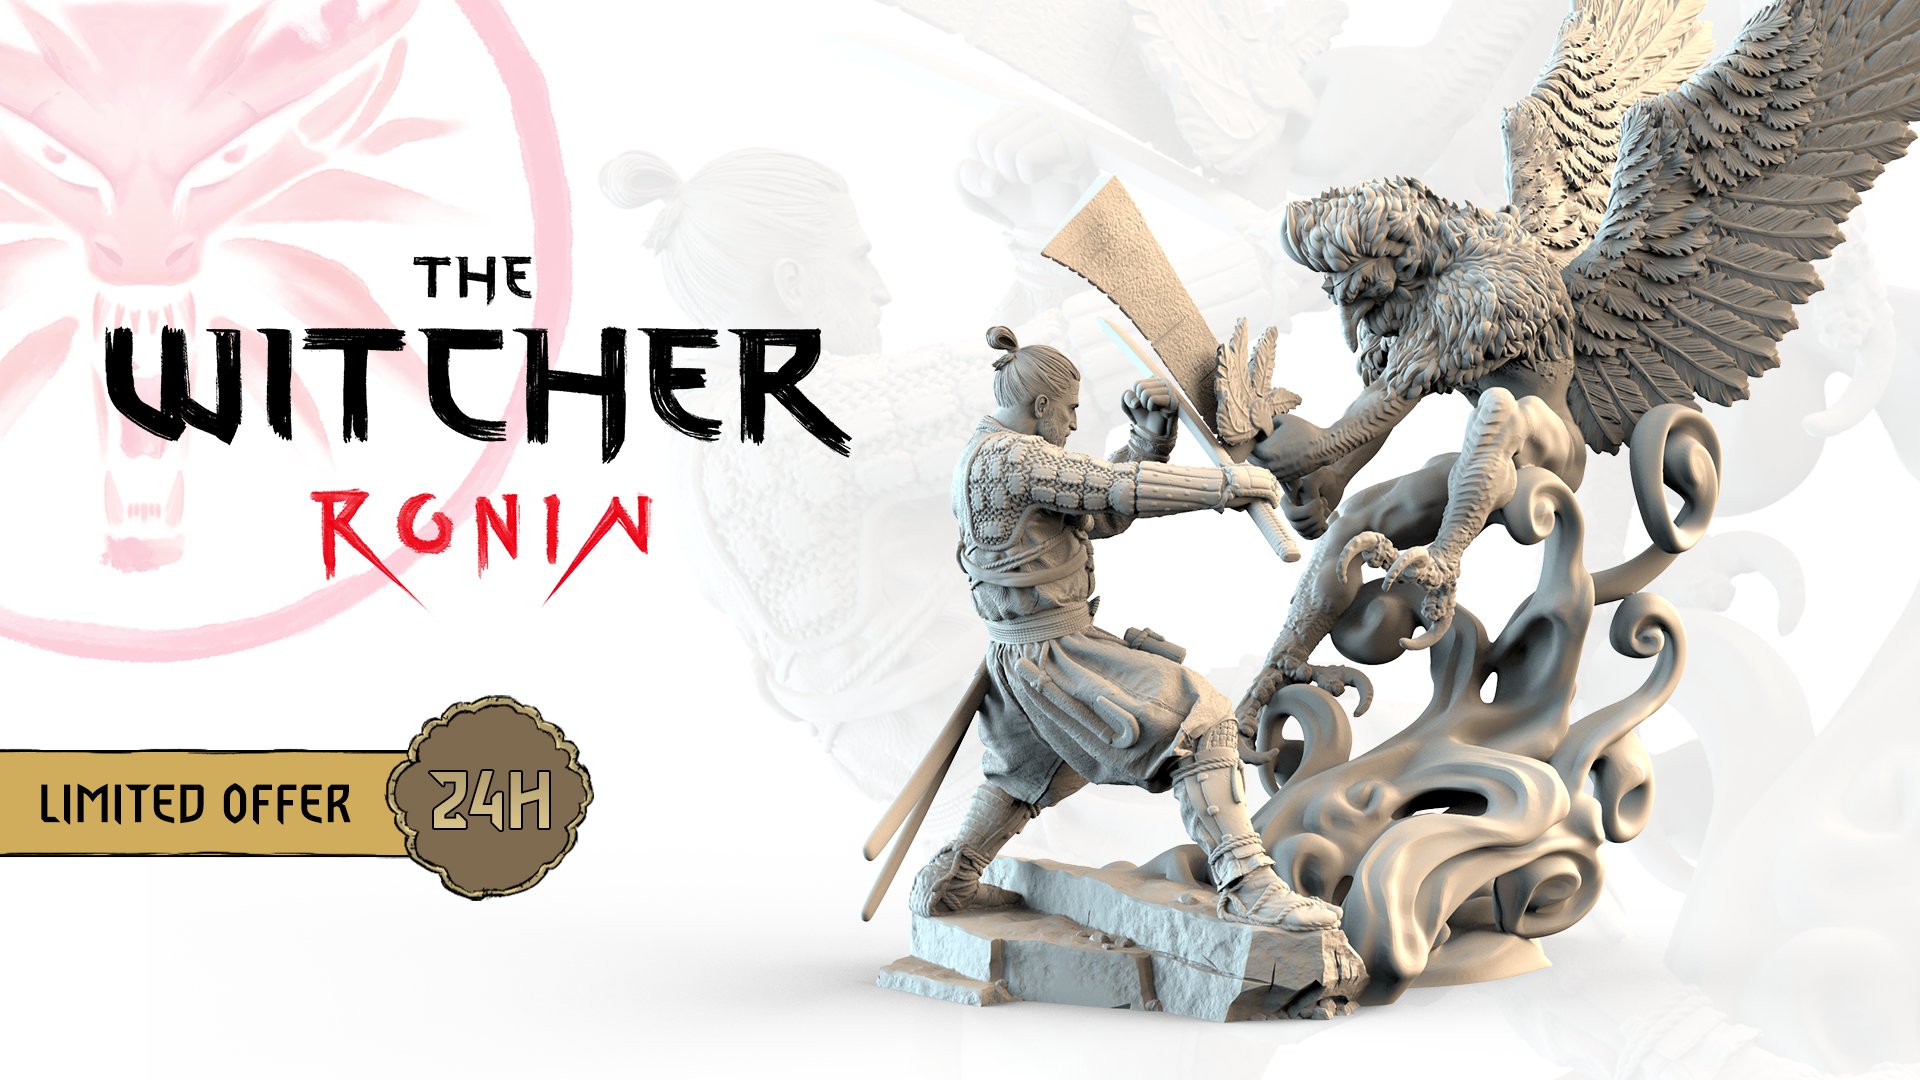 the witcher ronin figure